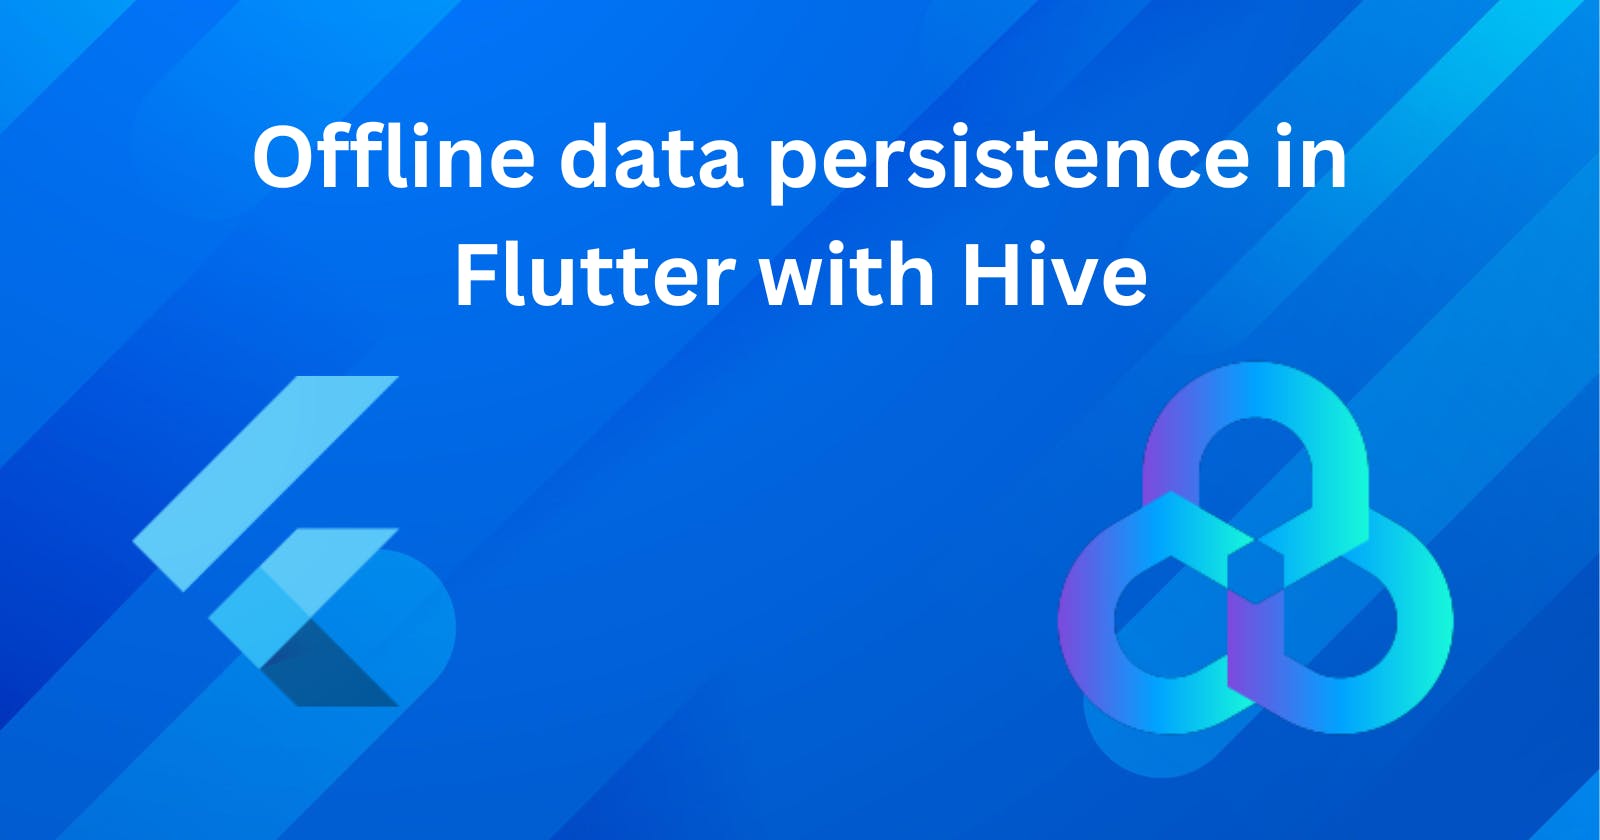 Offline data persistence in Flutter with Hive